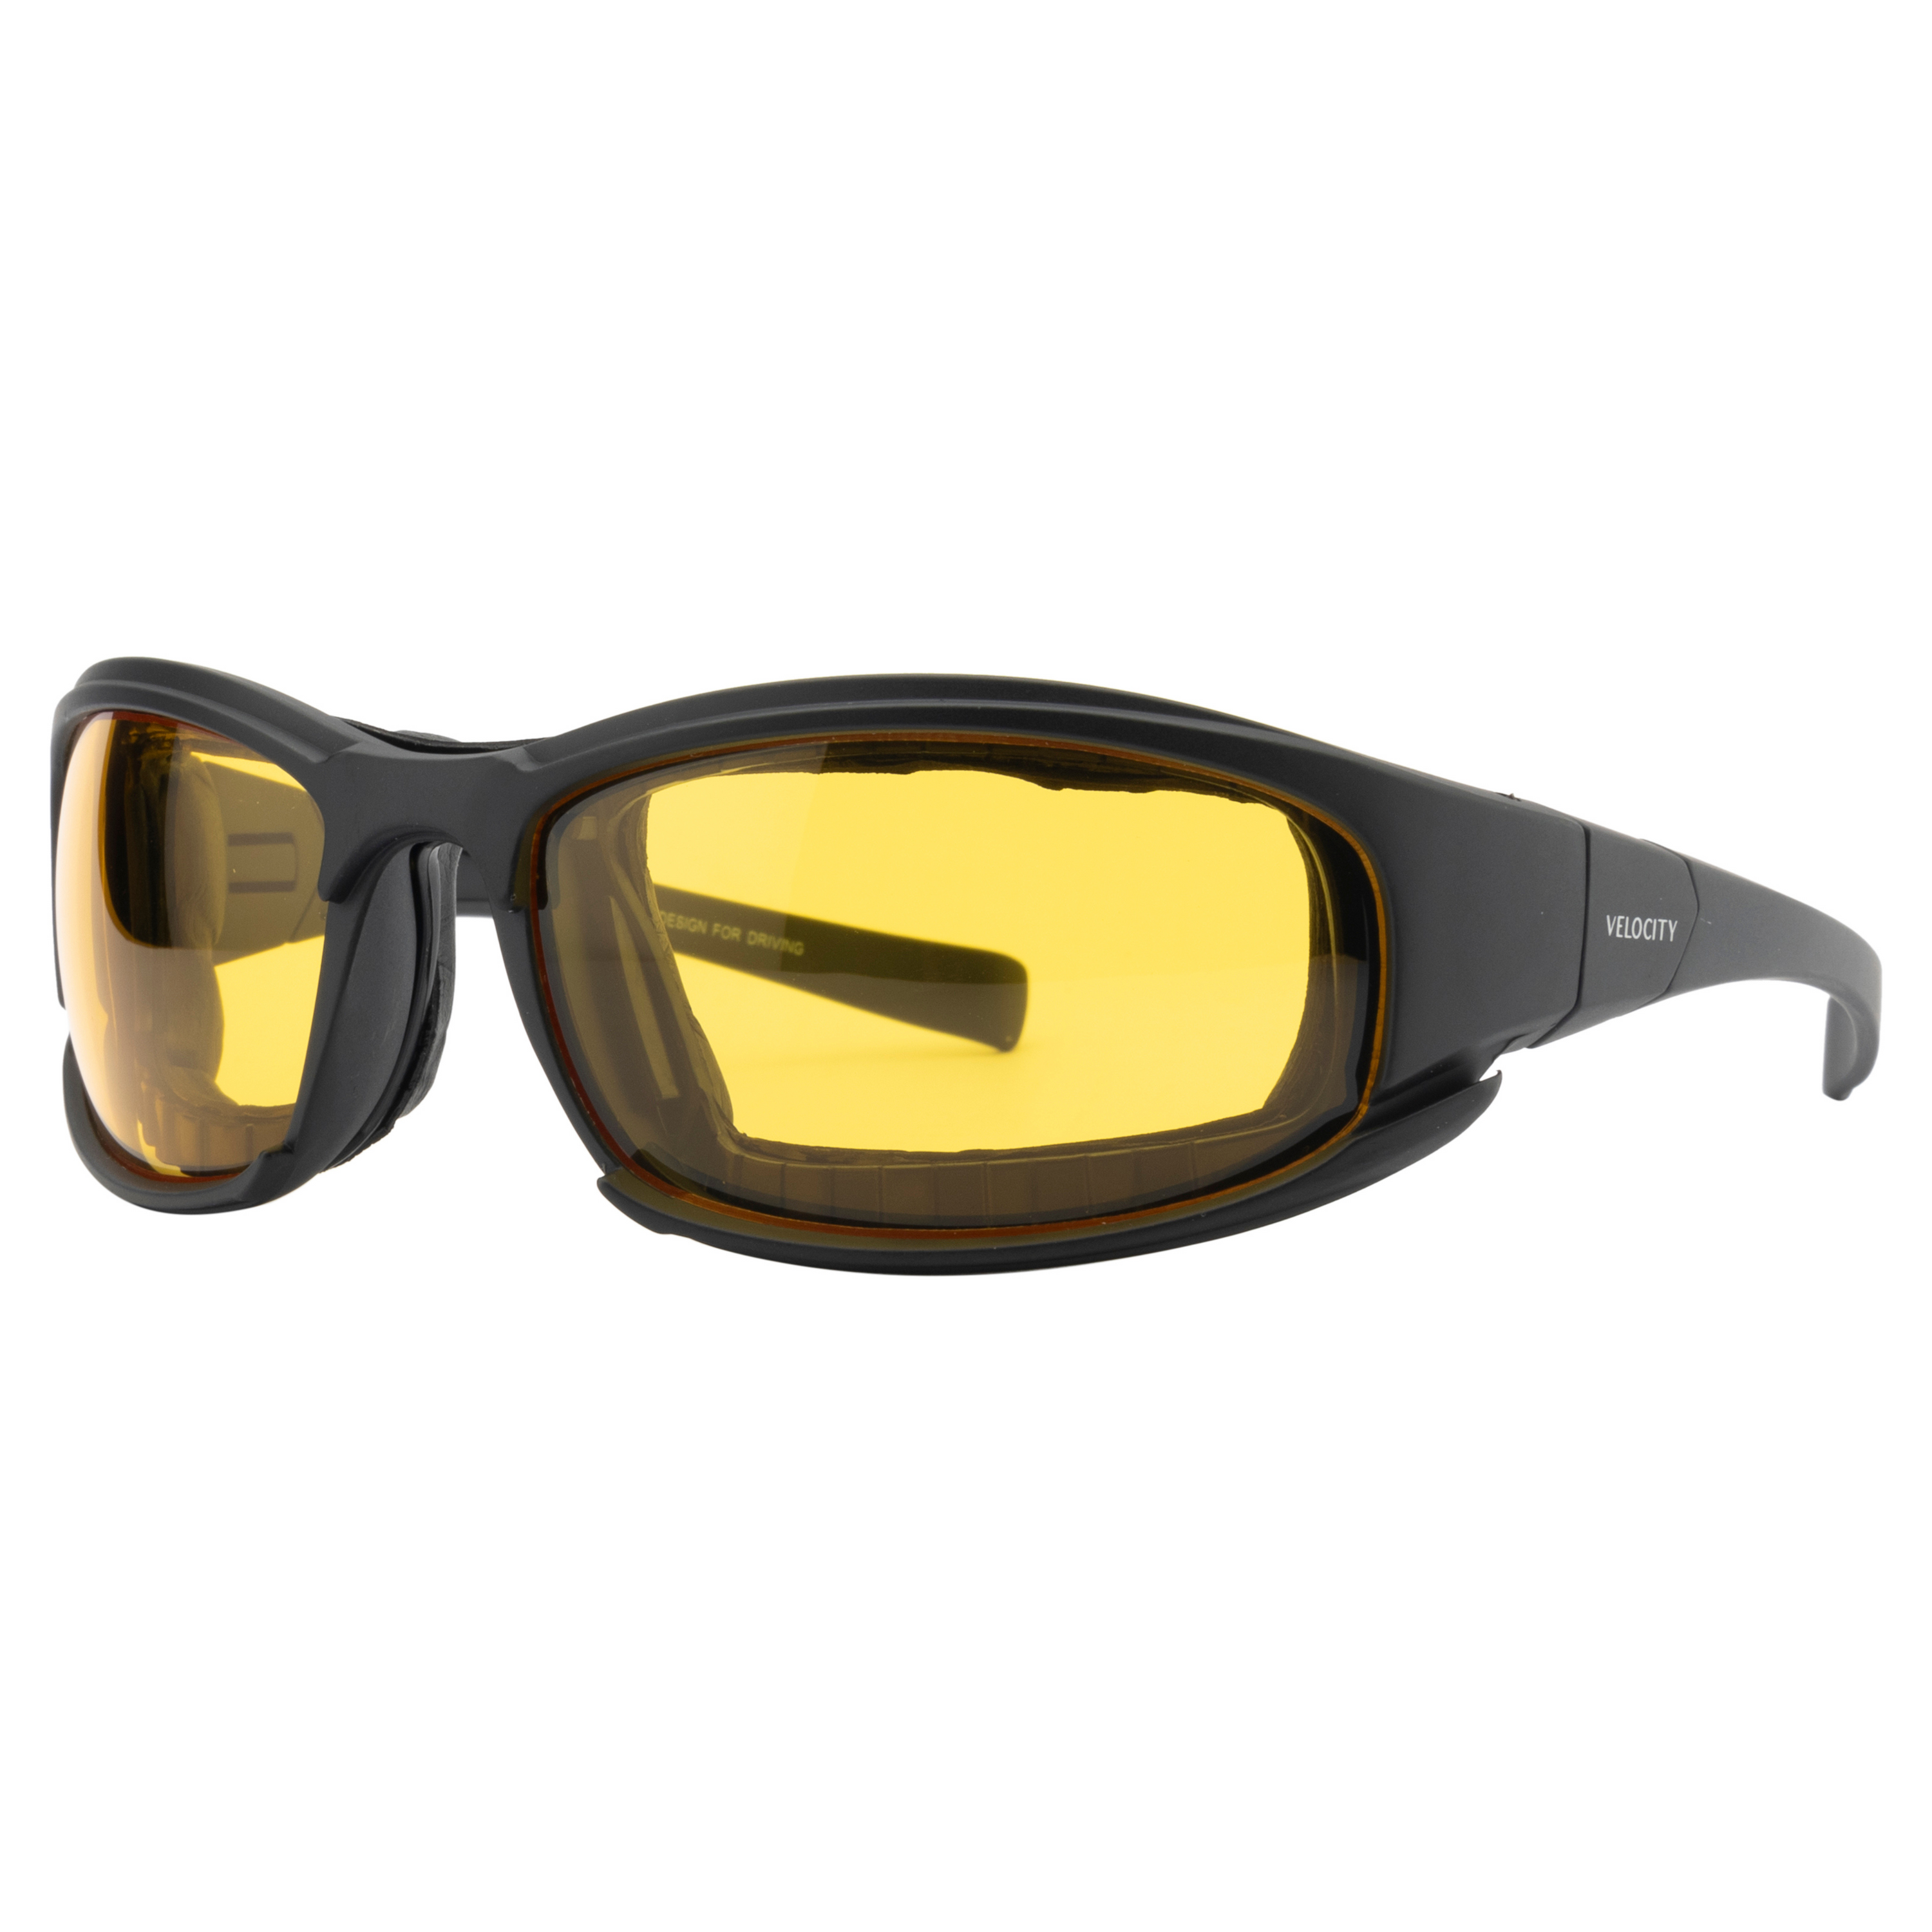 Velocity Riding Sports Sunglass | Driving Clear Vision | Car Driving | Bike Riding Glasses- 781-D2